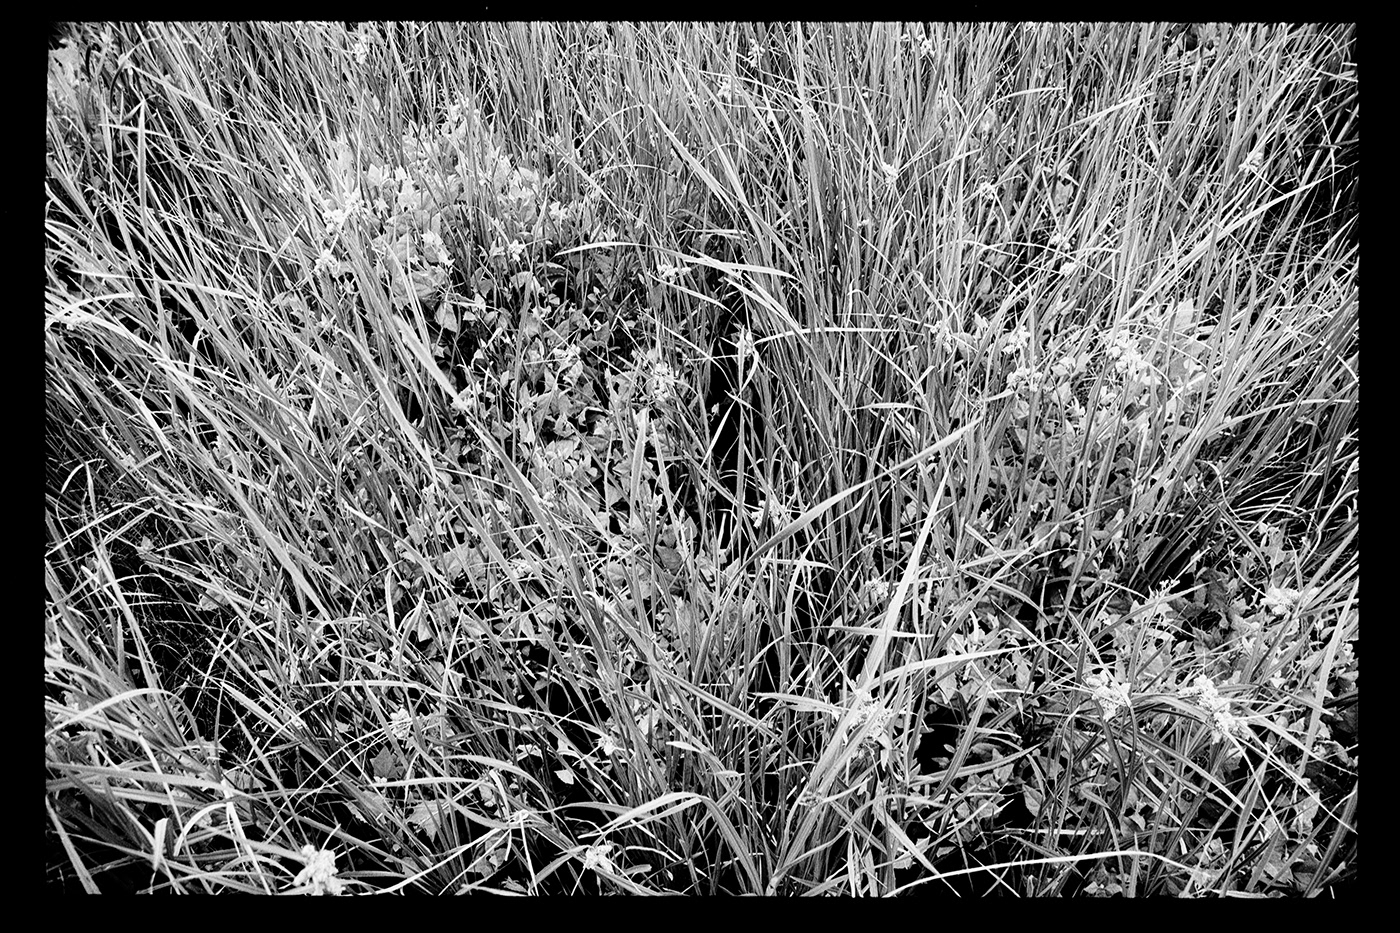 Outdoor Landscape bwphotography 35mm analog photography black and white